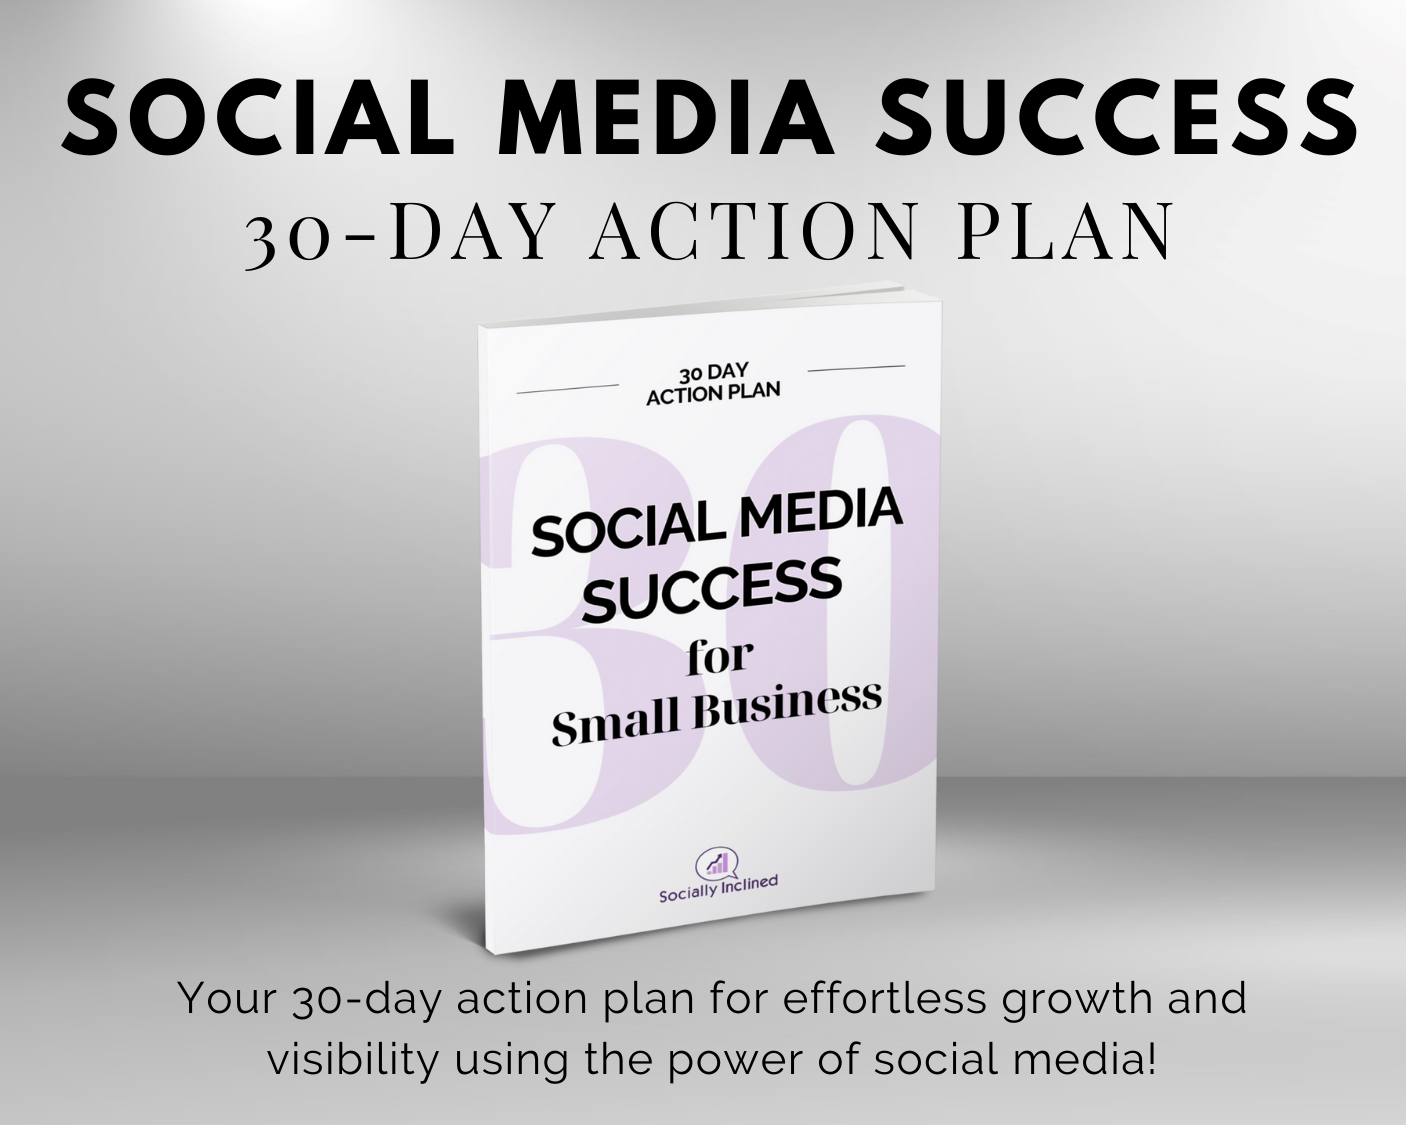 A book titled "Get Socially Inclined: 30-Day Action Plan" presented as a guide for small businesses to enhance their online presence.